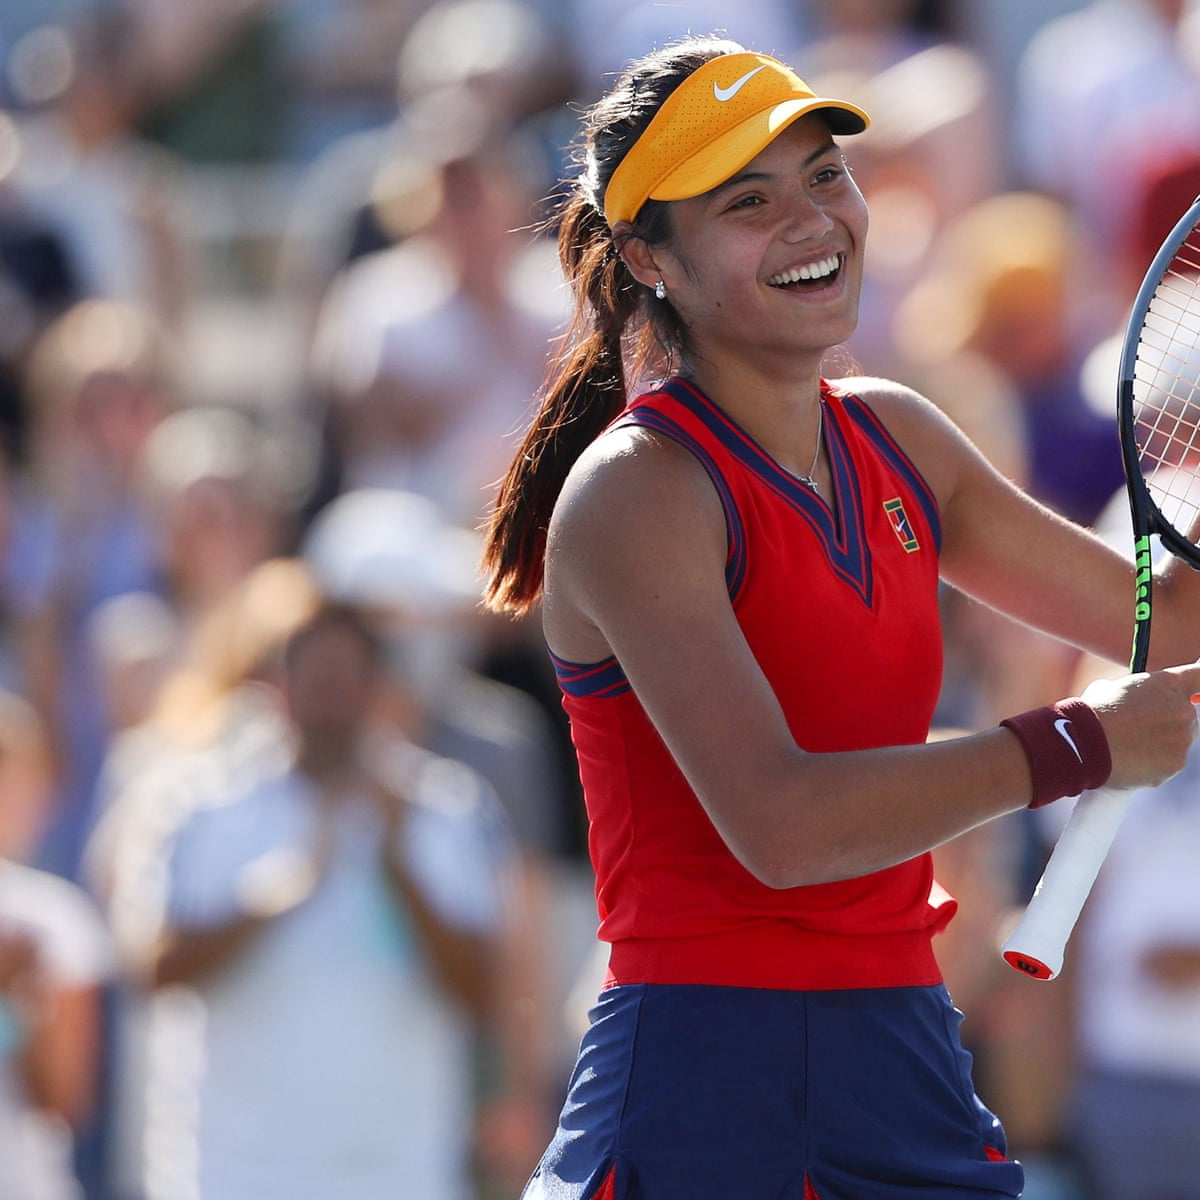 Raducanu to face Barty conqueror after thrashing Sorribes Tormo at US Open